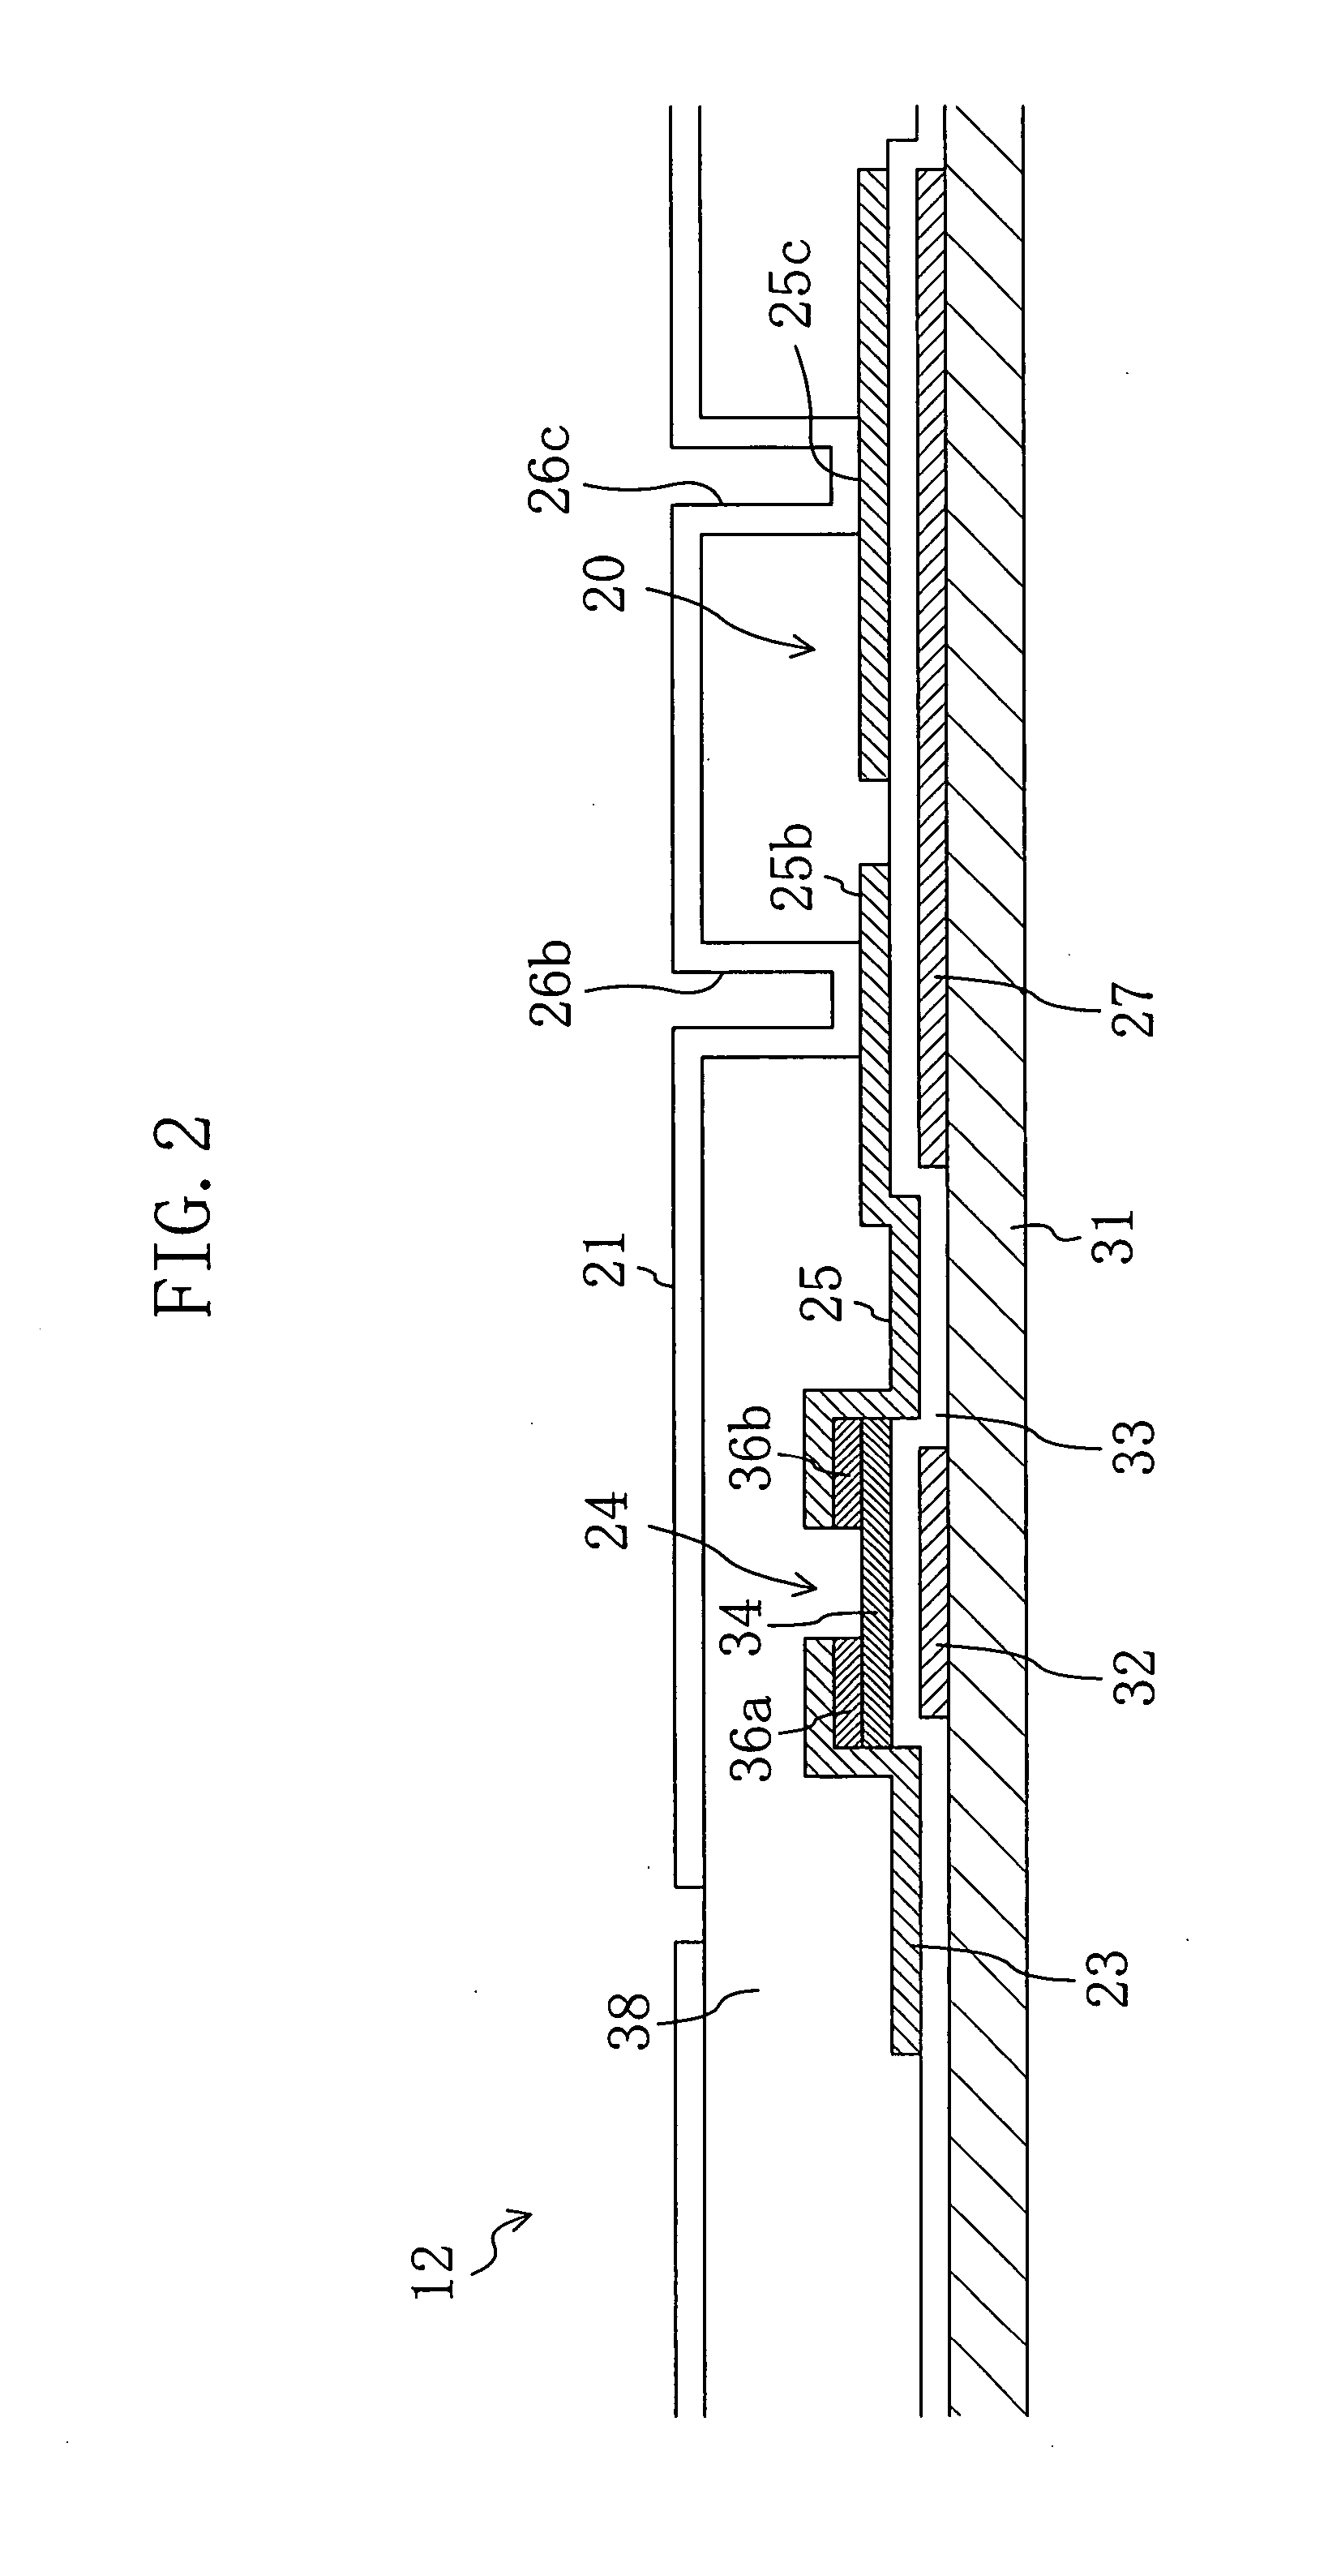 Active Matrix Substrate, Method for Fabricating Active Matrix Substrate, Display Device, Liquid Crystal Display Device, and Television Device